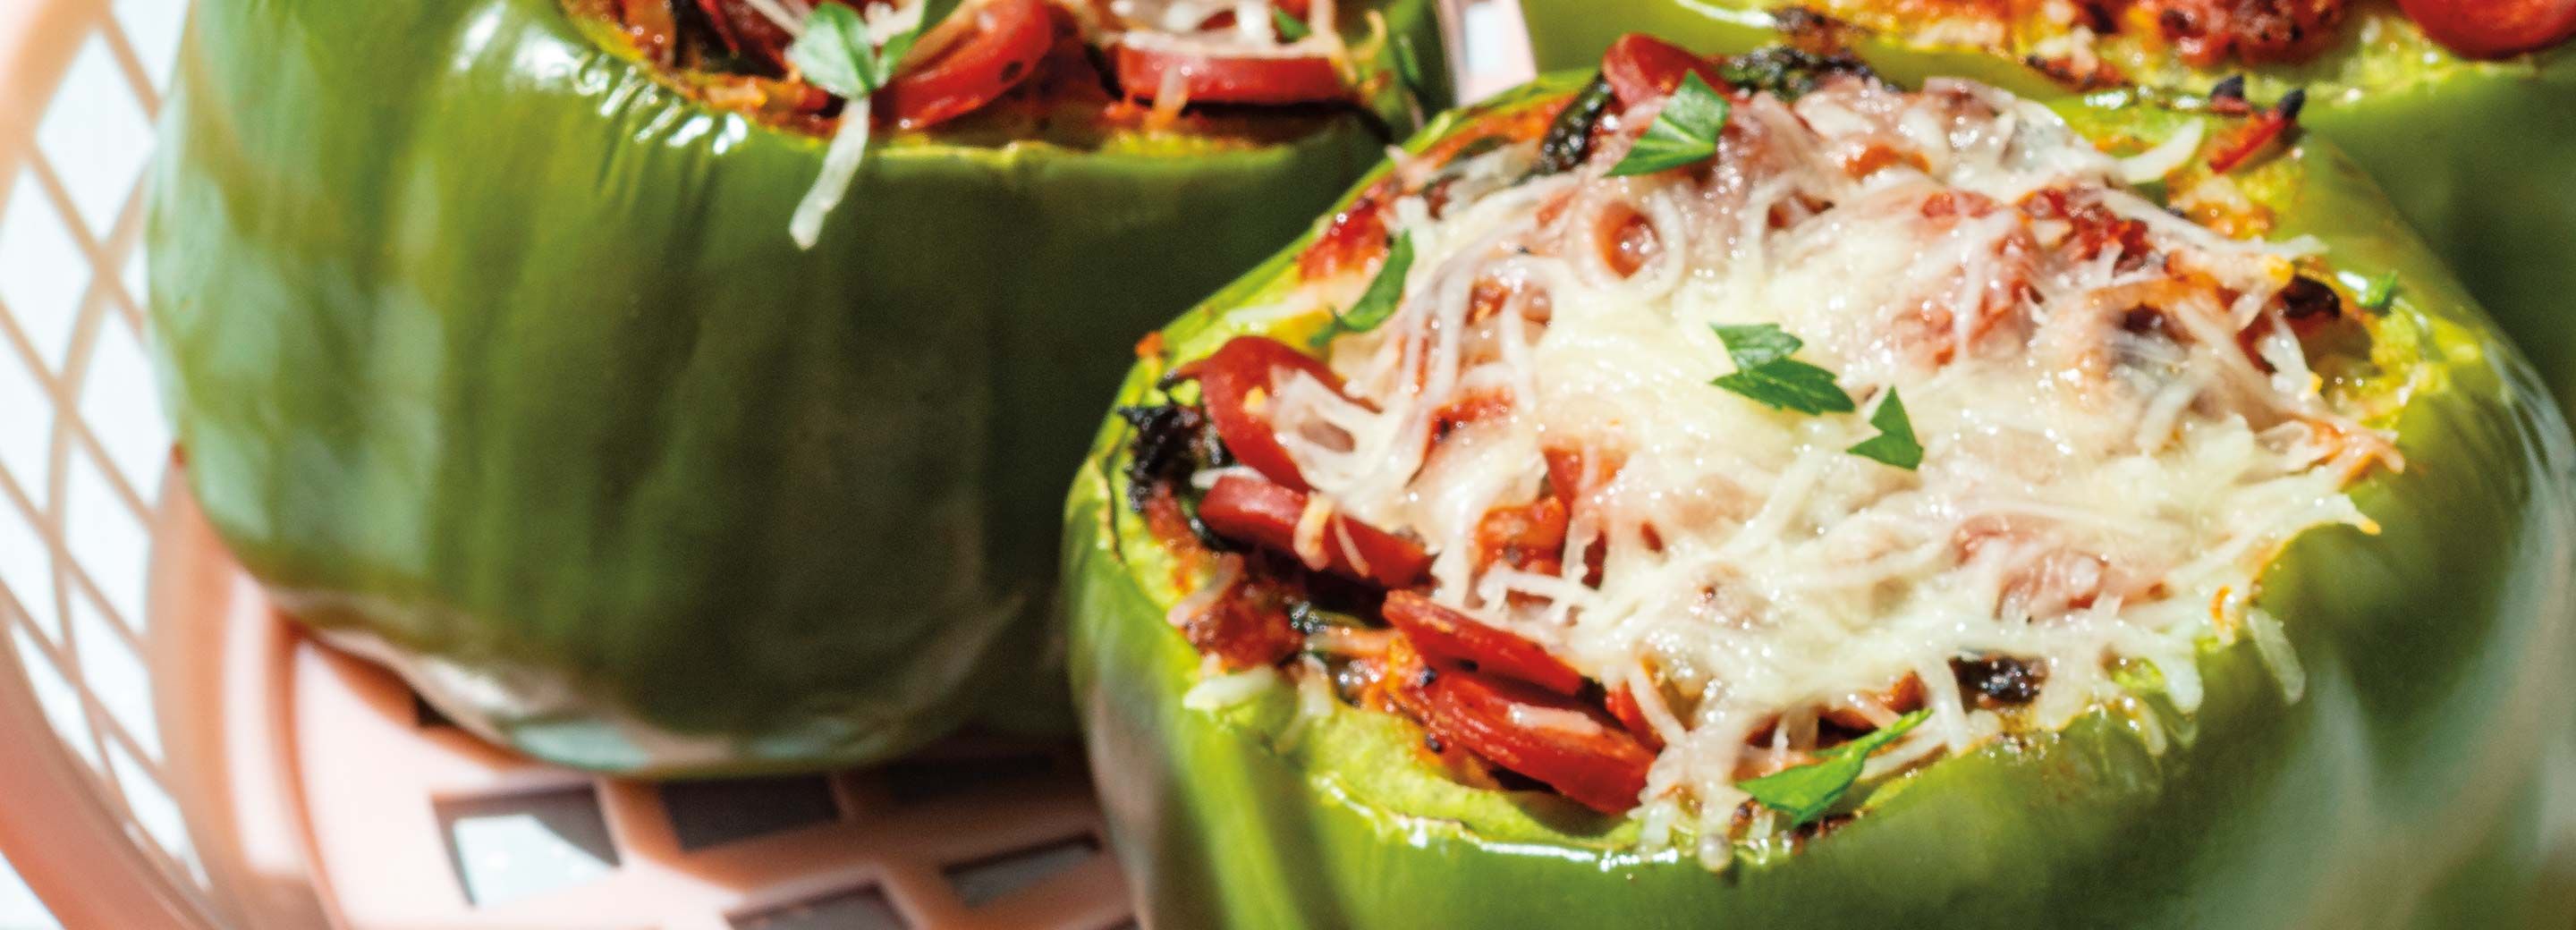 Super-Powered Pizza Stuffed Peppers